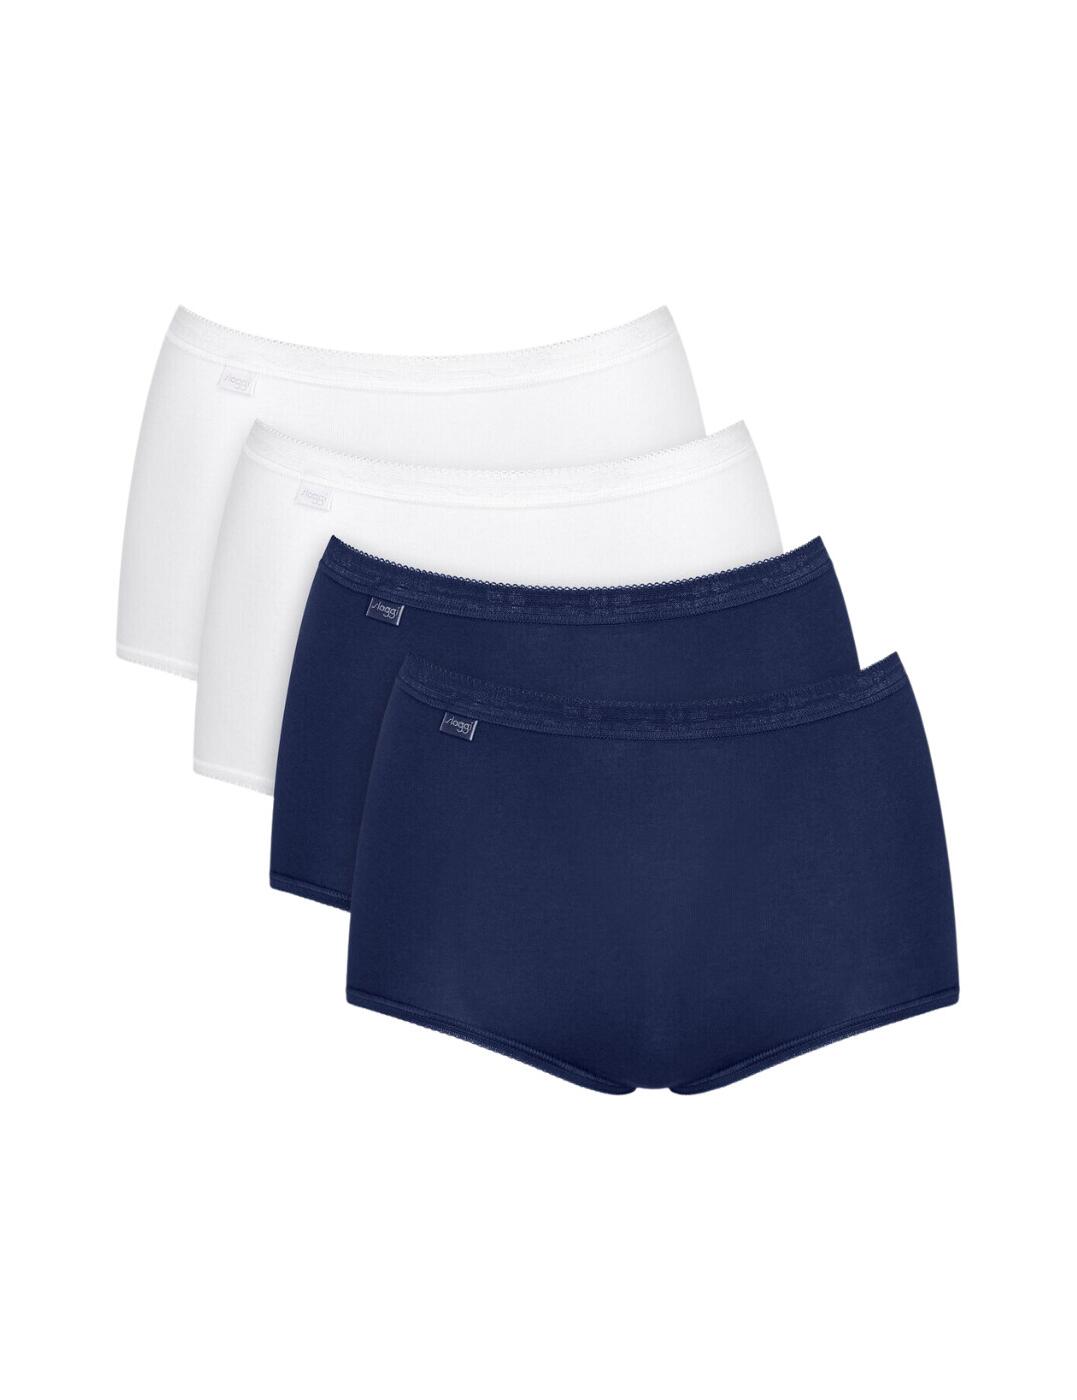 Sloggi Basic+ Maxi Brief Knickers Pants 4 Pack 95% Cotton - 10103326 RRP  £45.00